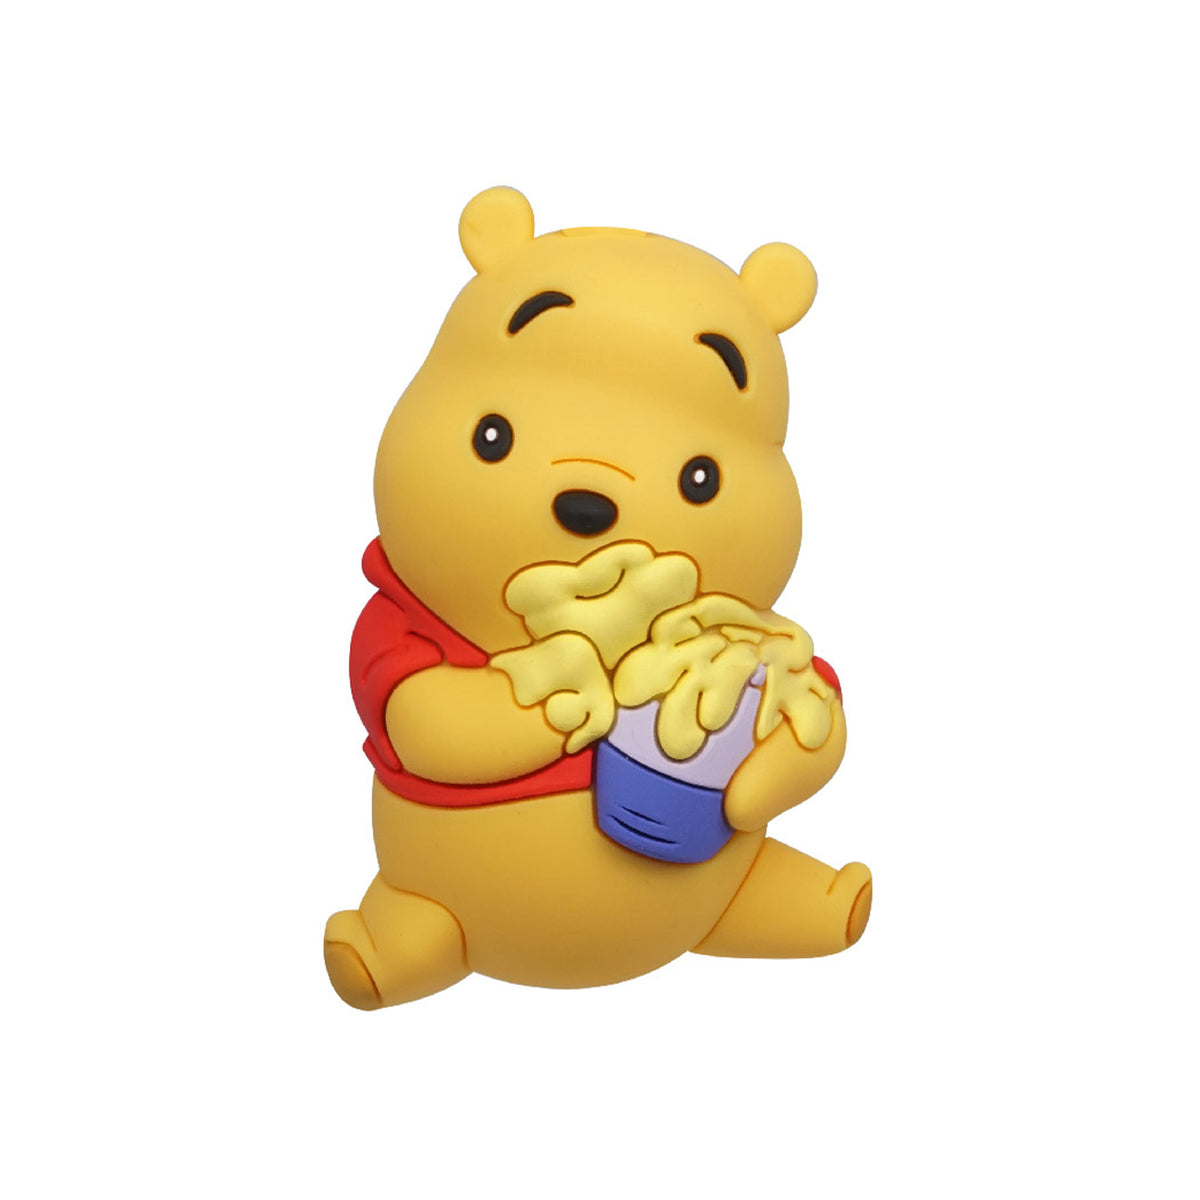 Disney Winnie the Pooh Collectible 3D Foam Magnet